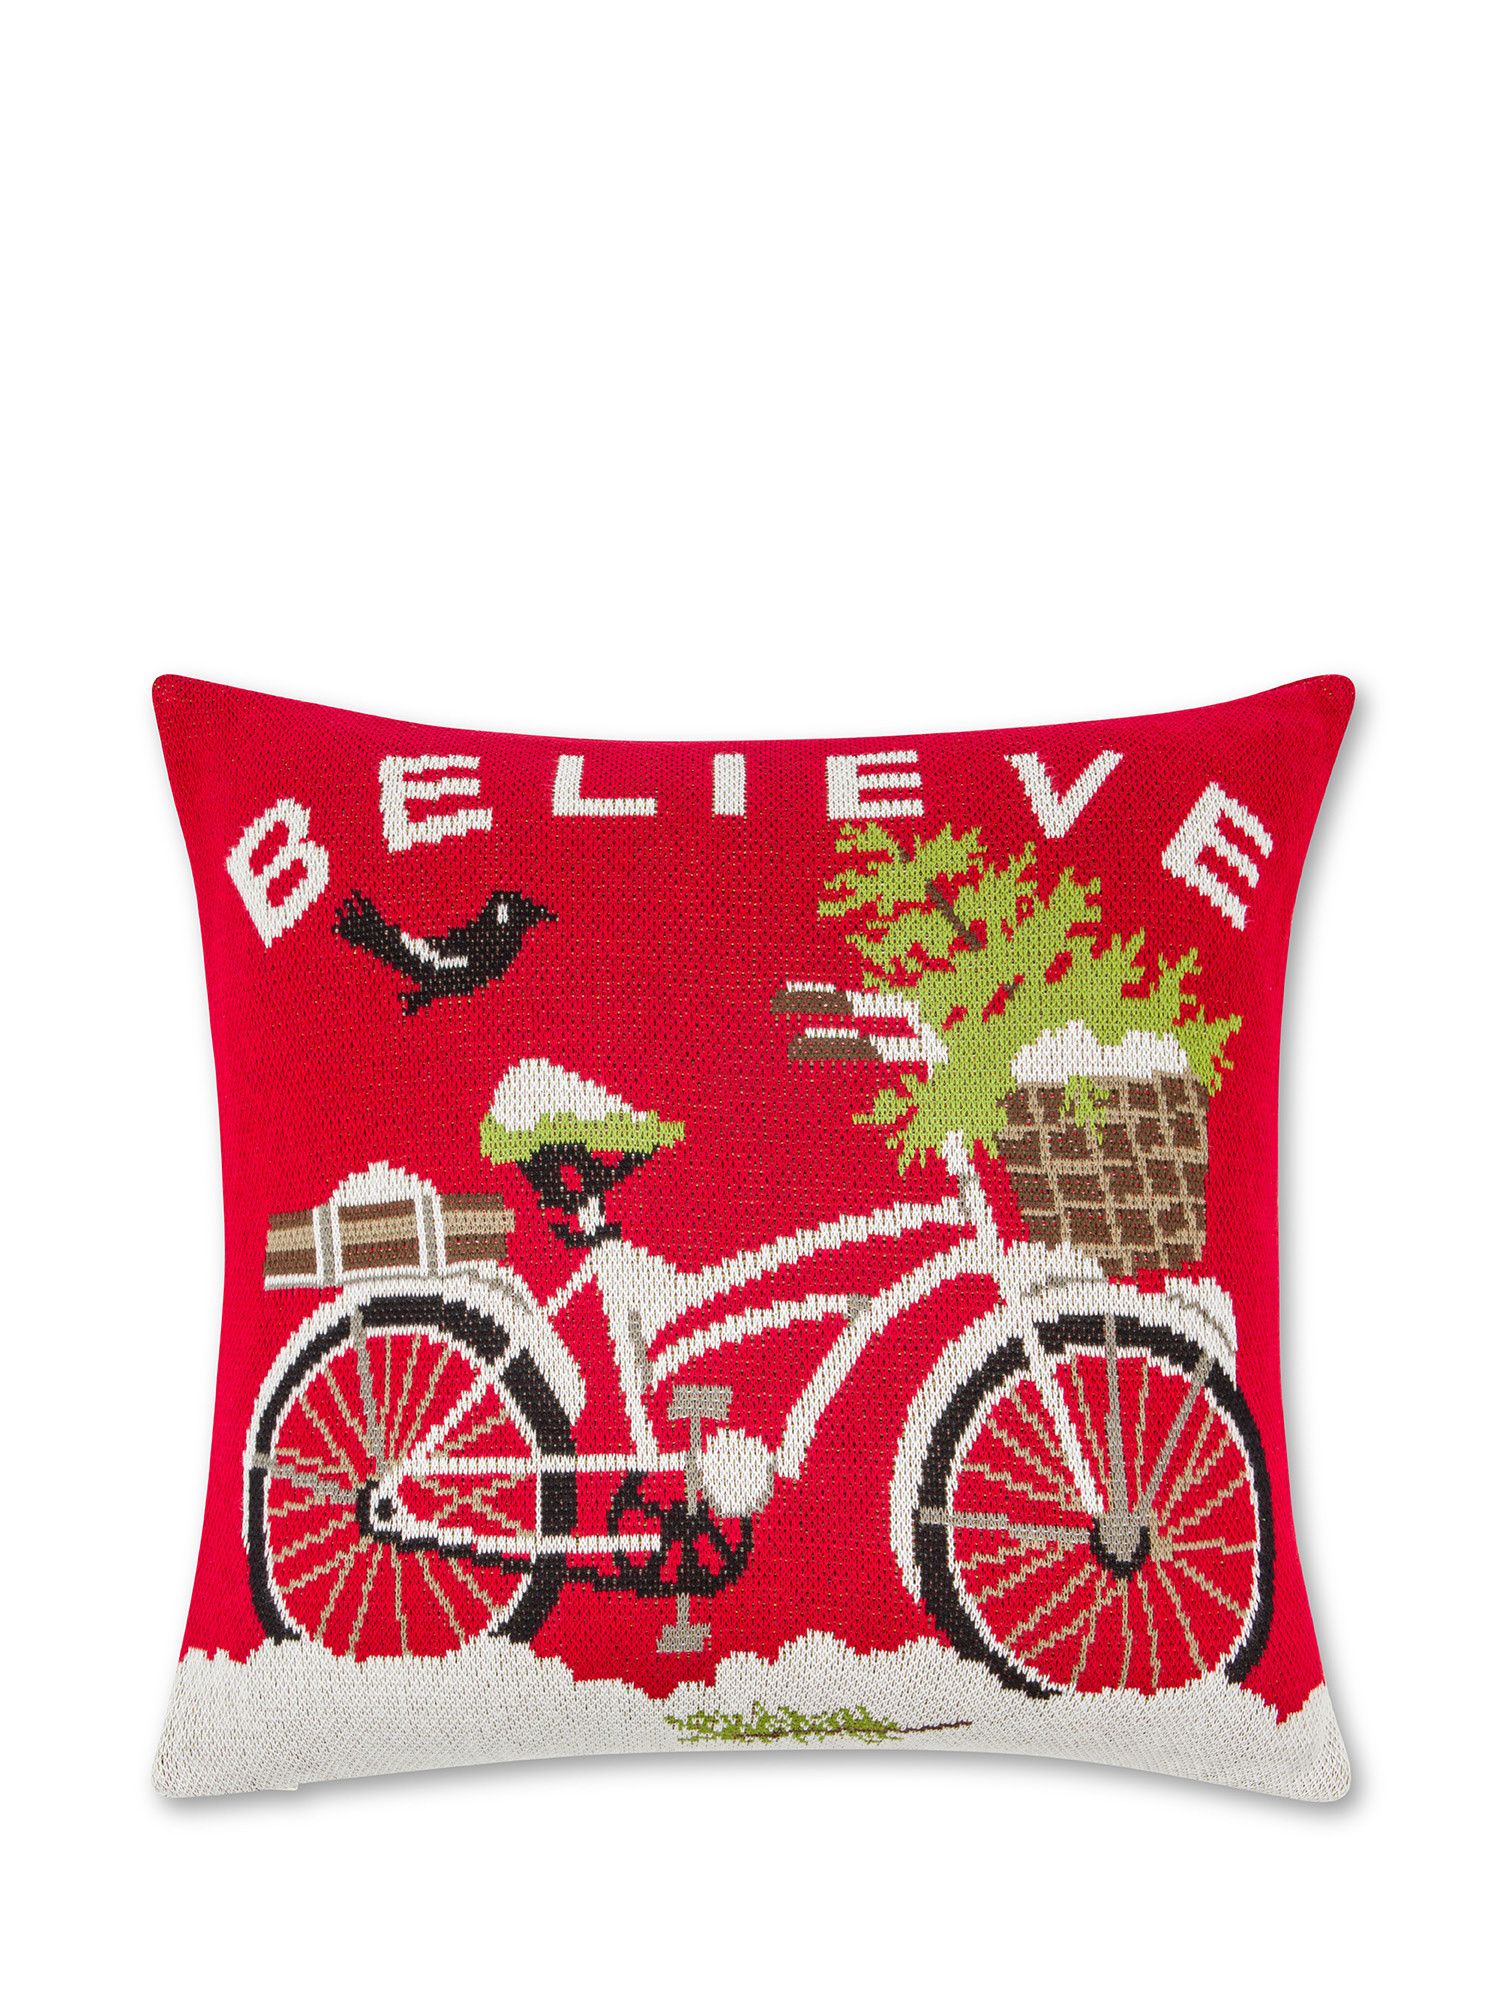 Jacquard knitted cushion 45x45cm, Red, large image number 0